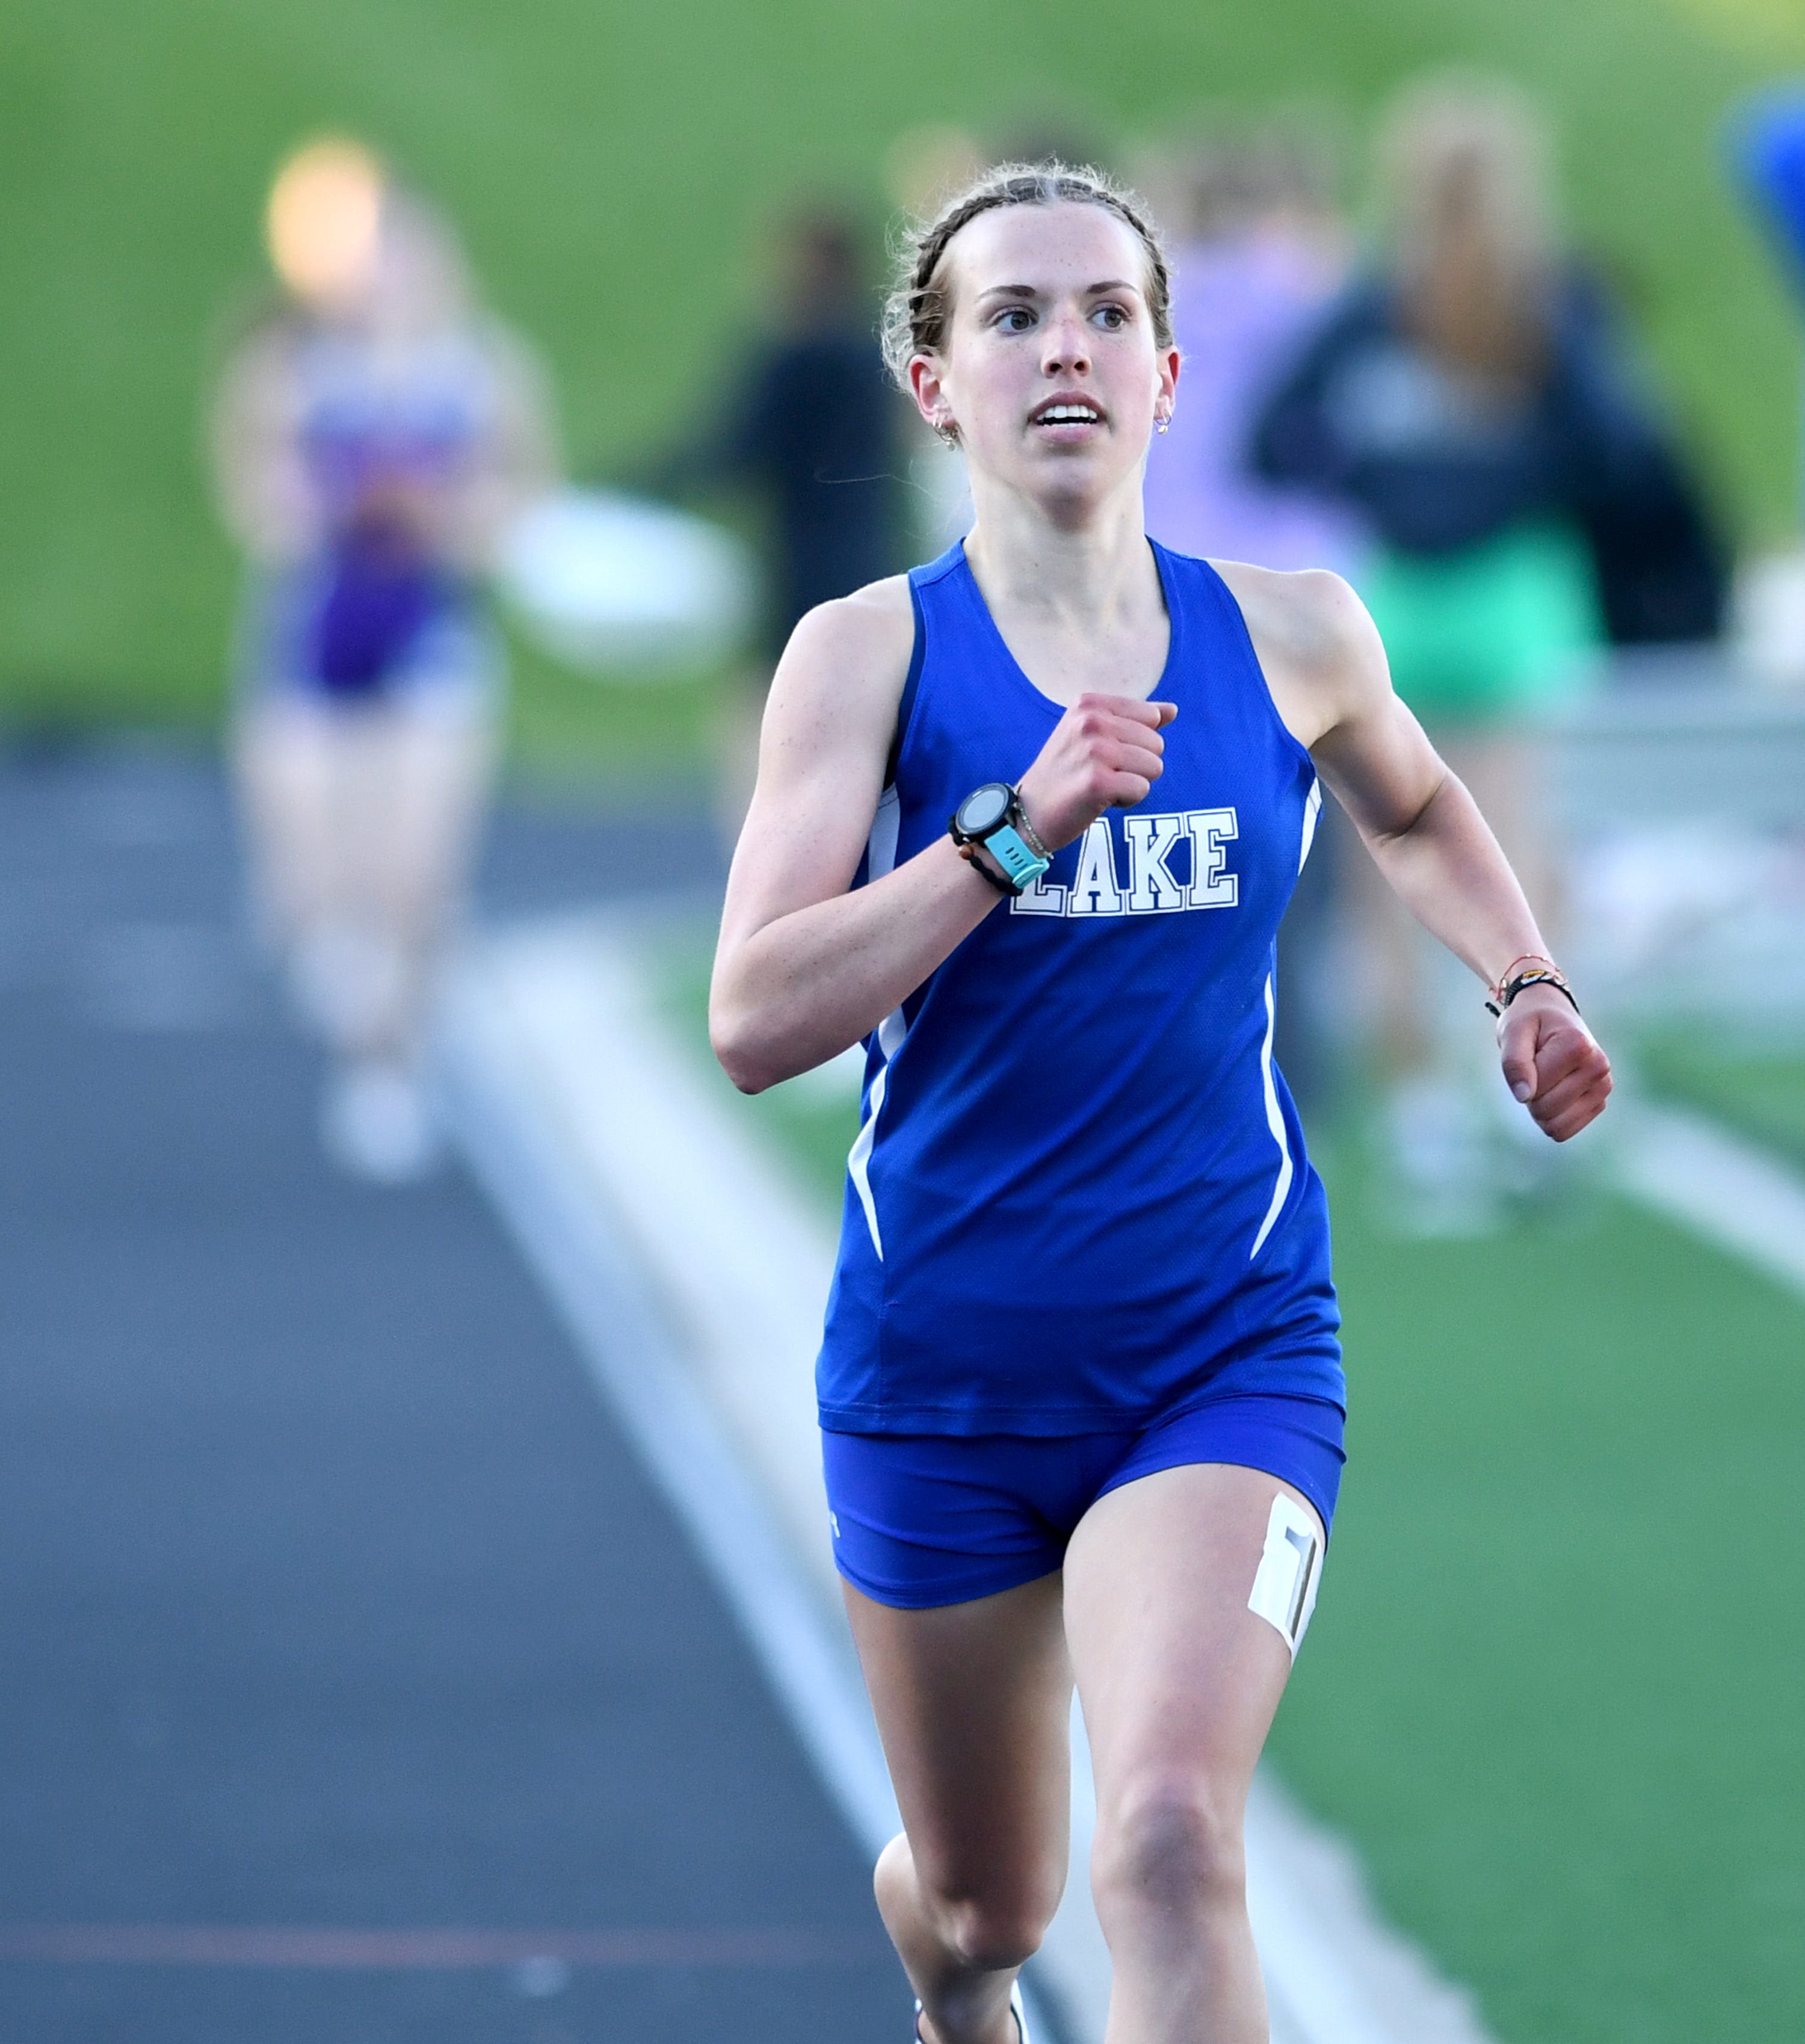 Distance doubles in postseason have Daniela Scheffler ready for 3,200 at OHSAA state track